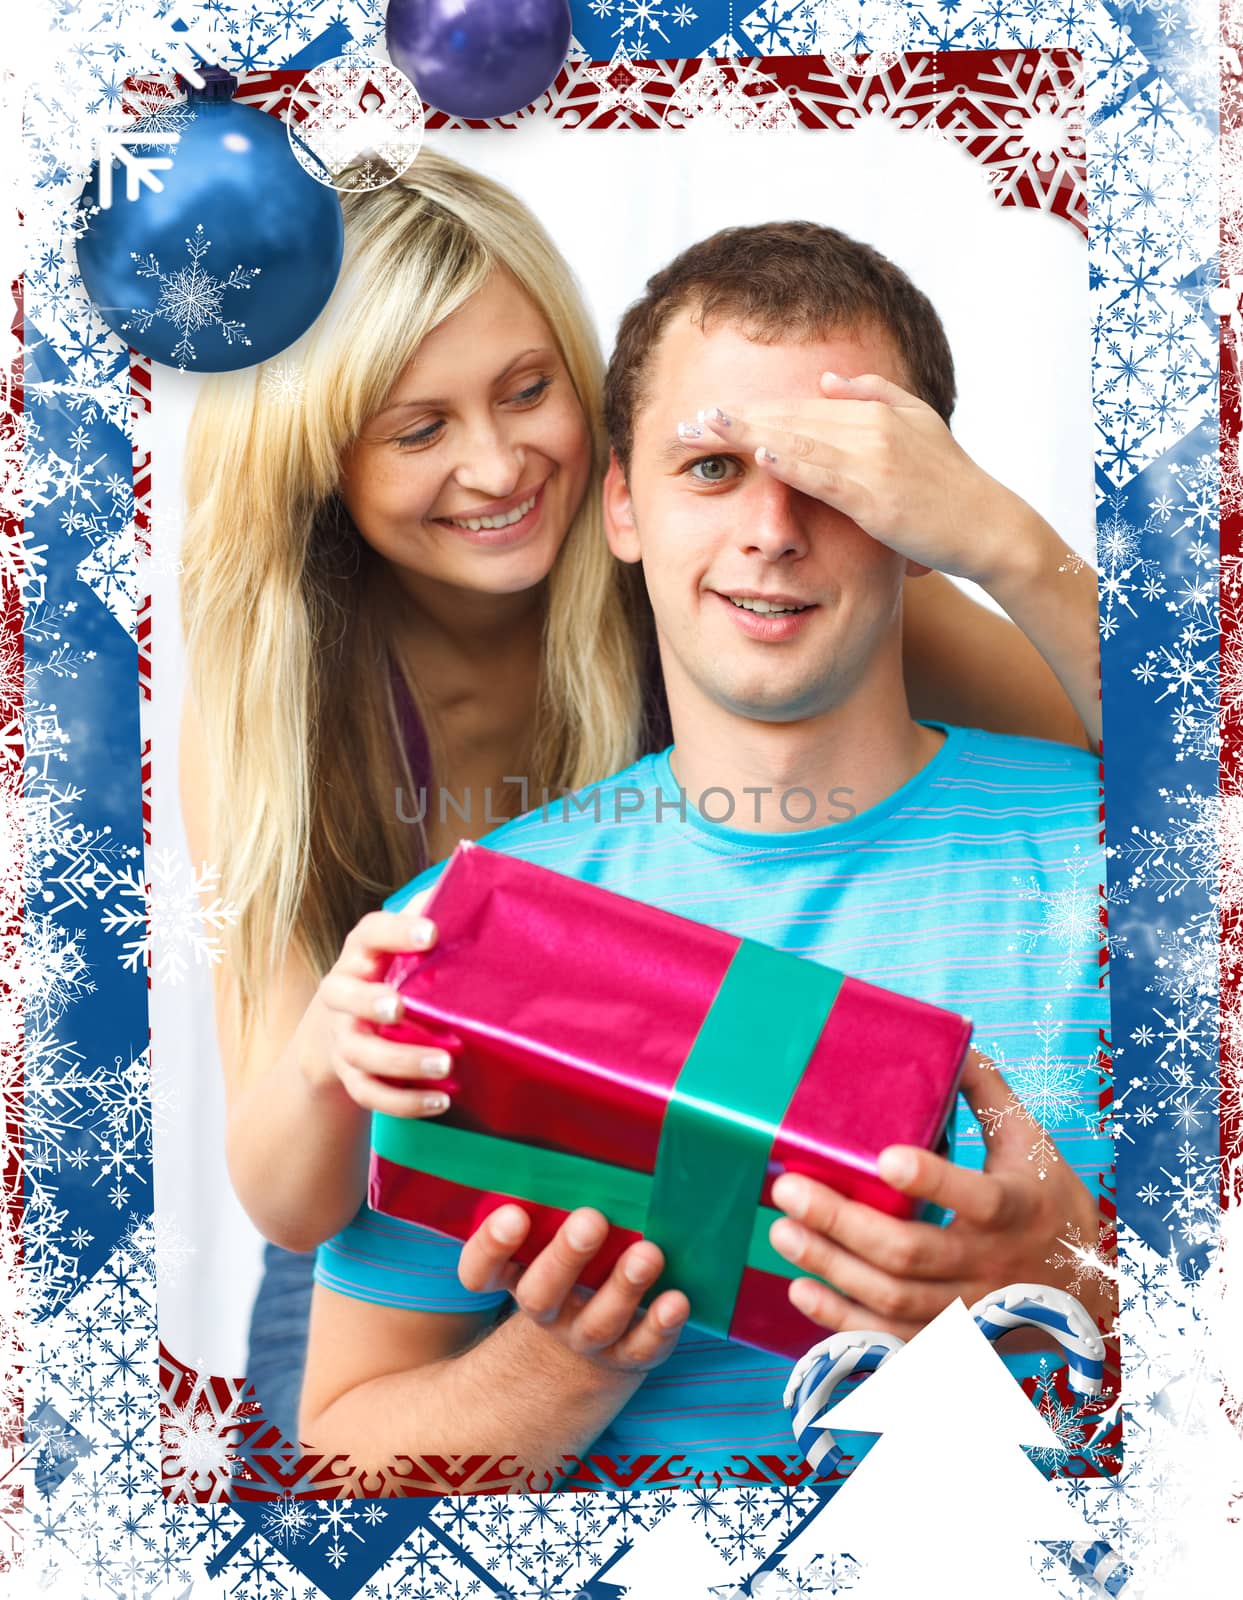 Composite image of woman giving a present to her boyfriend  by Wavebreakmedia